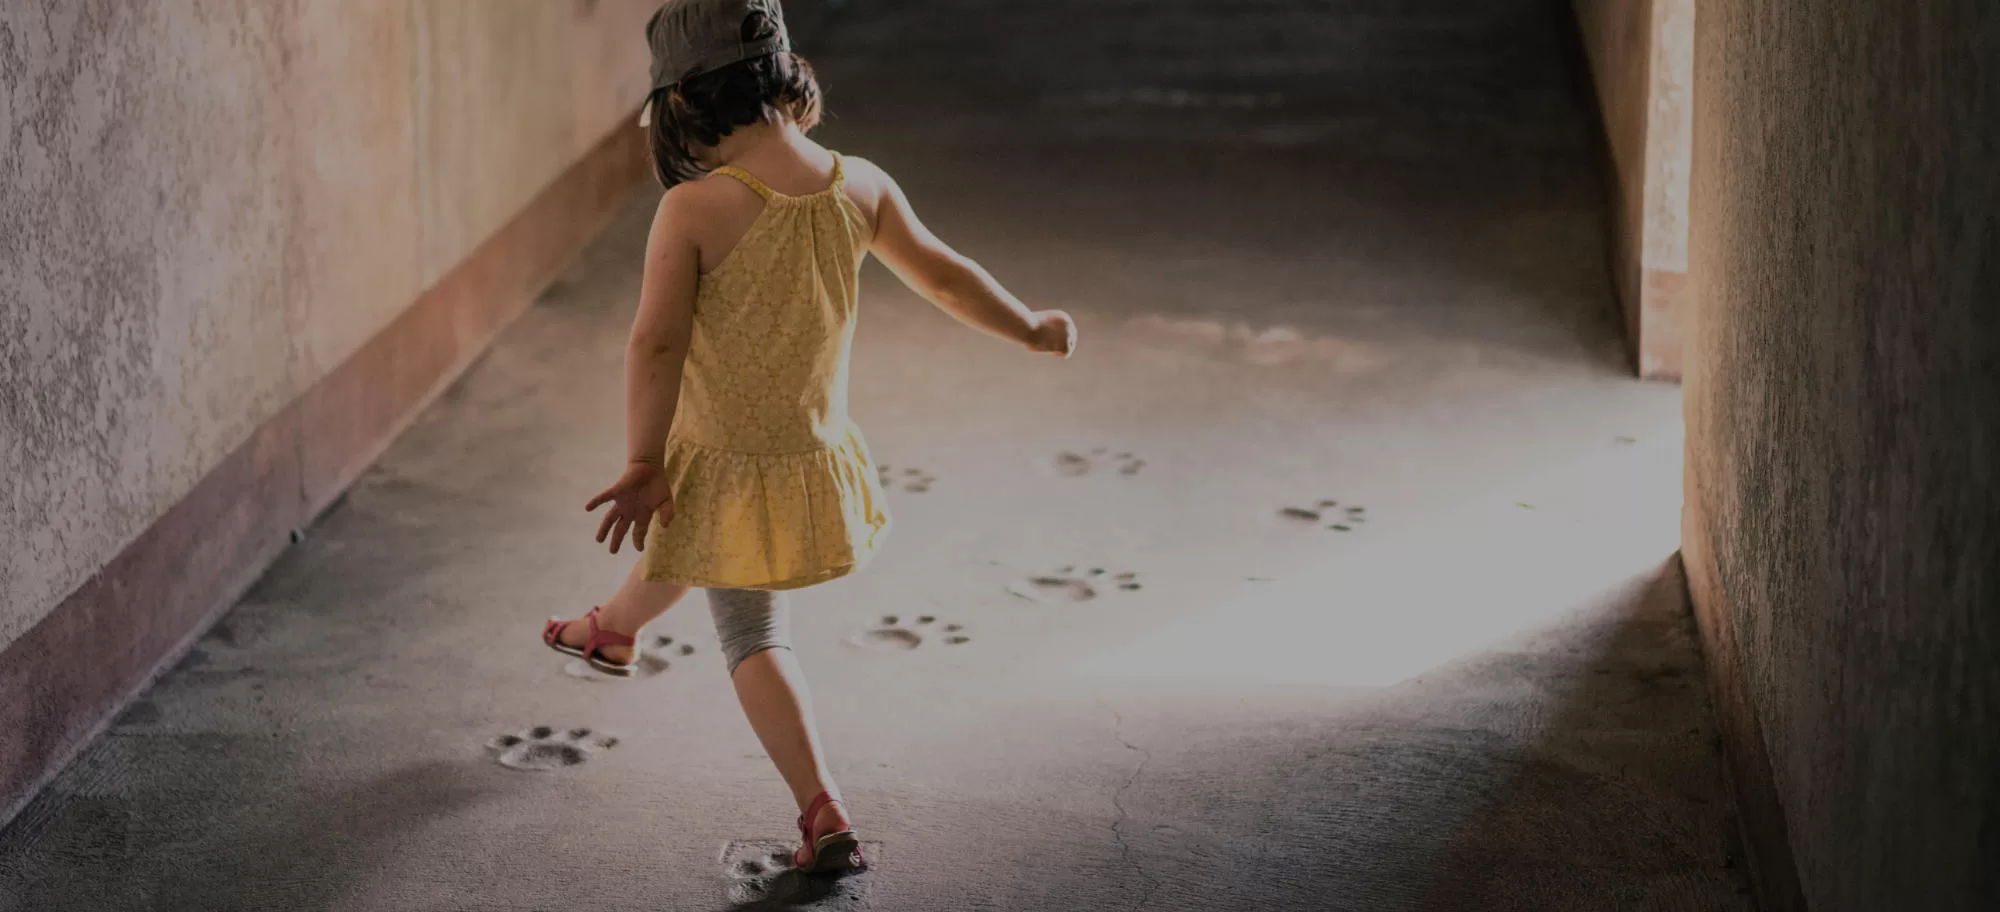 Young girl taking steps following footprints on floor